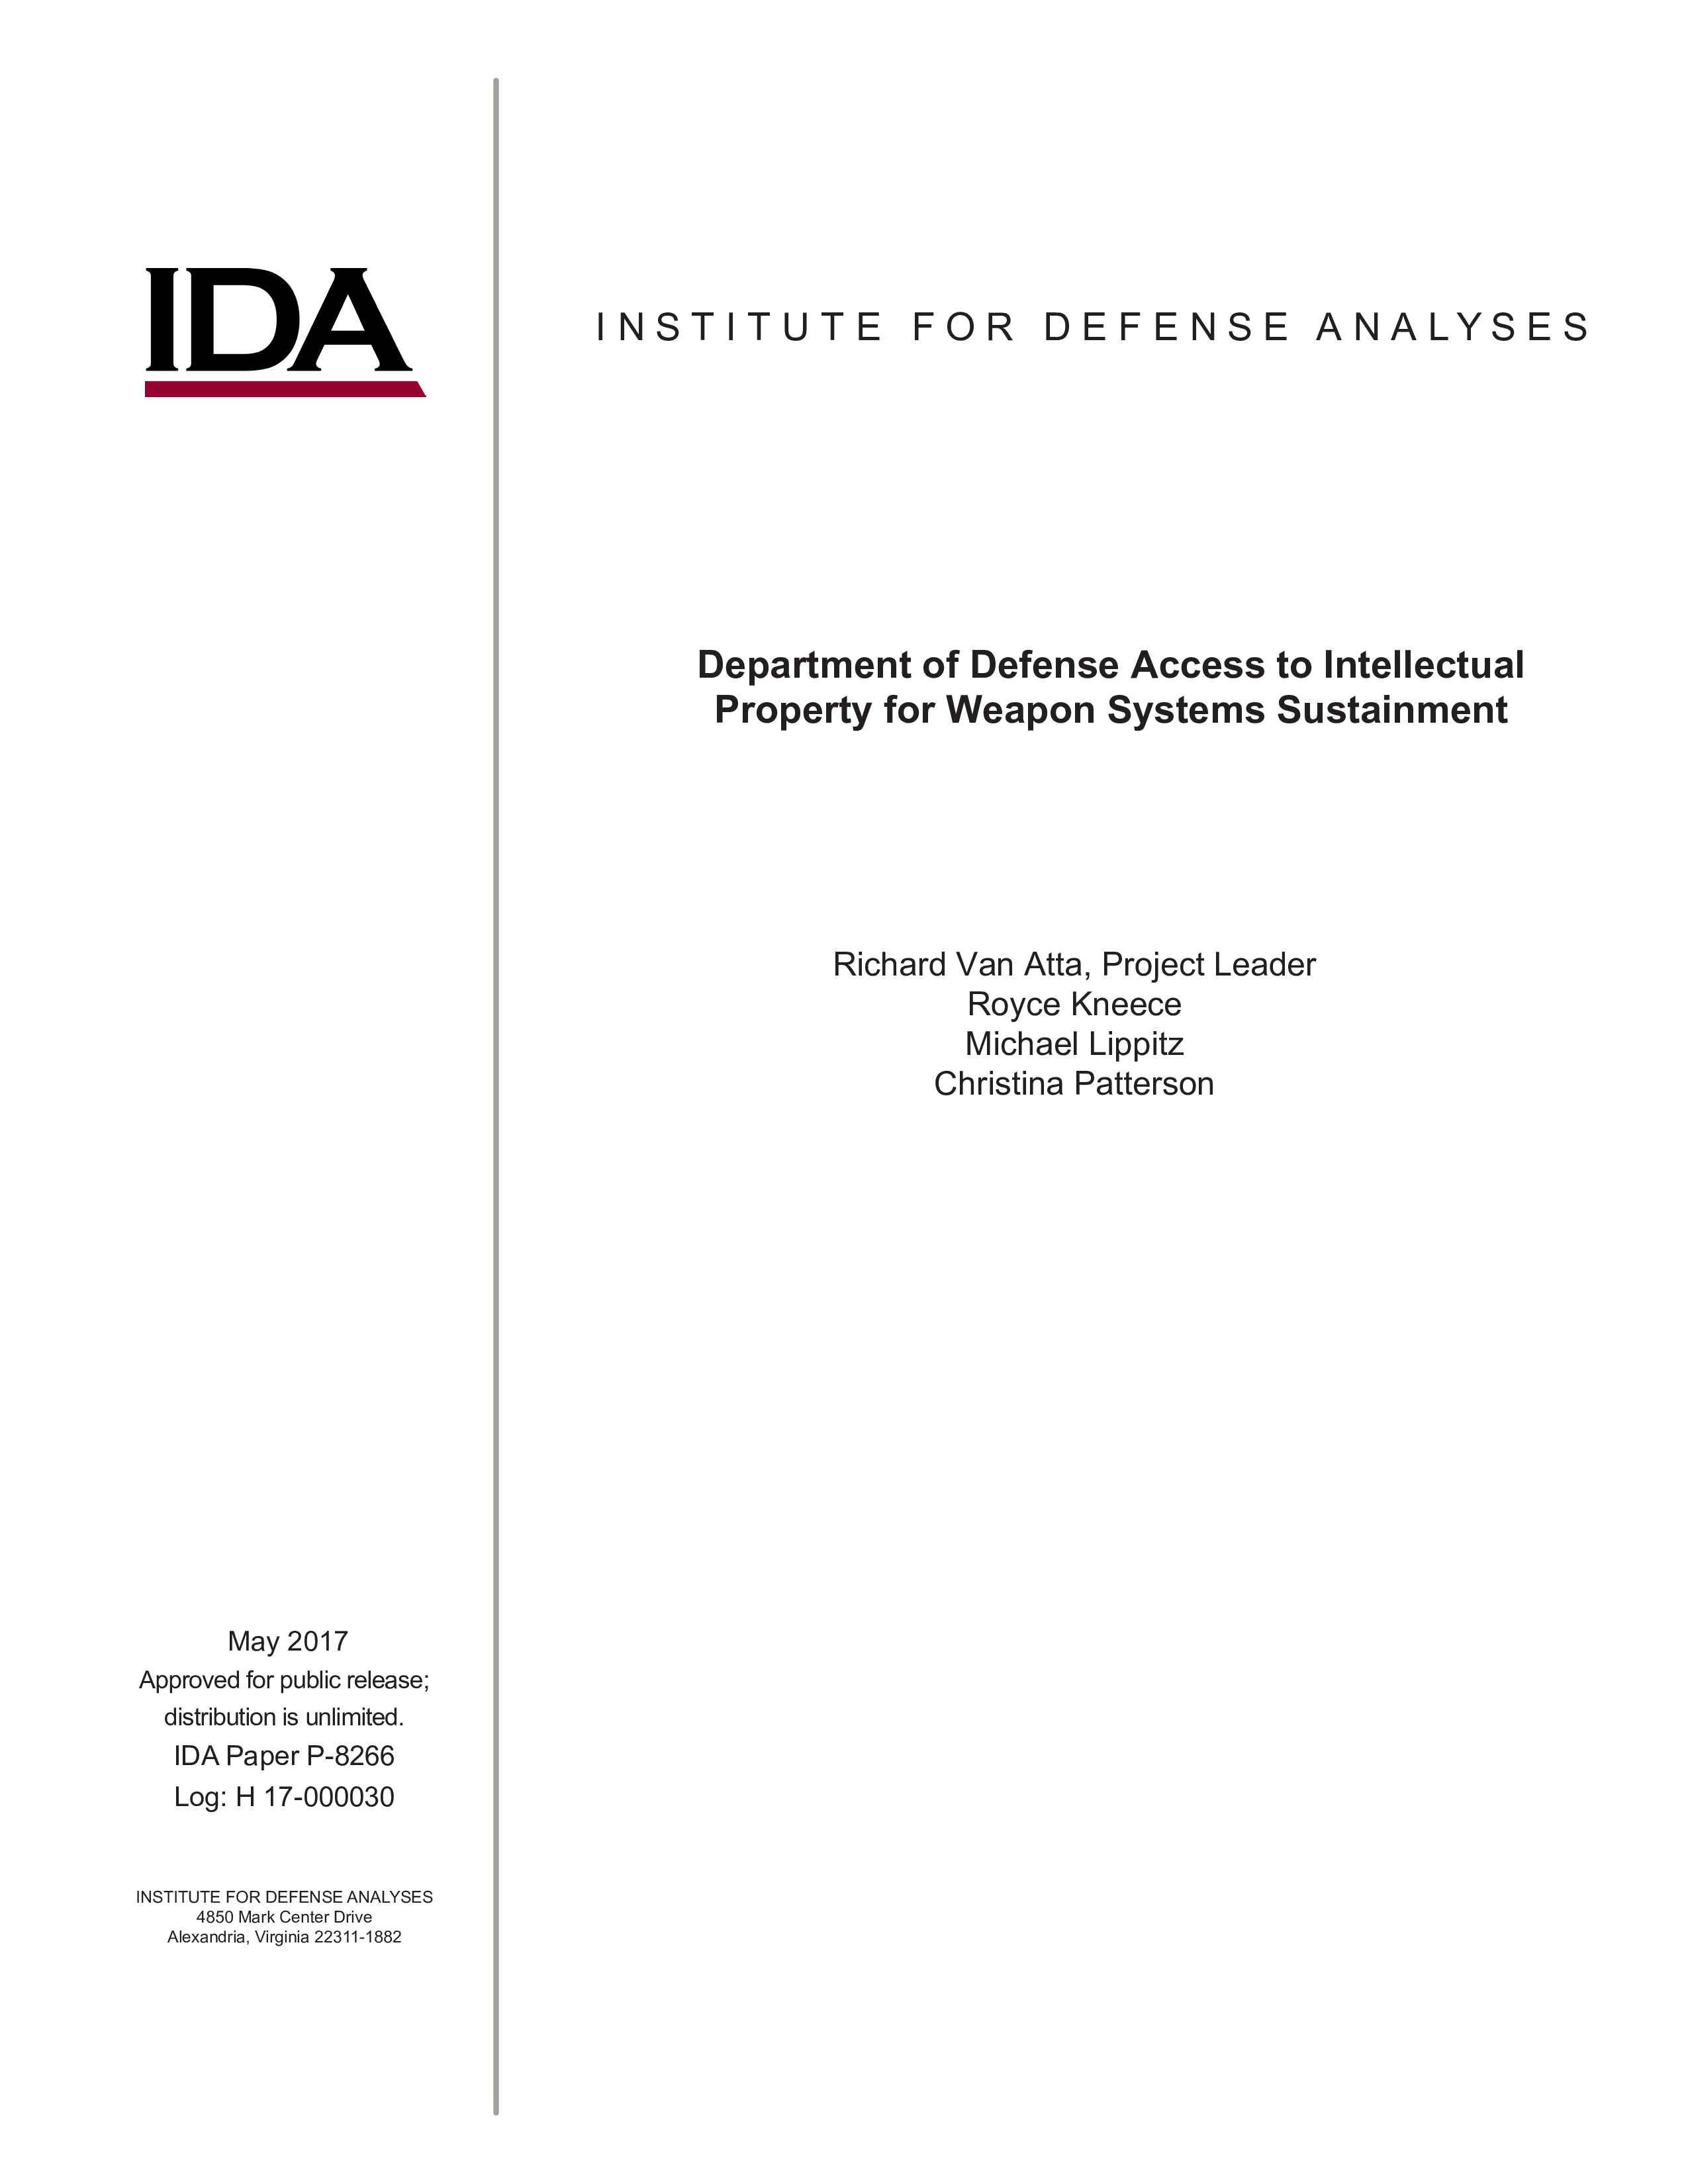 Department of Defense Access to Intellectual Property for Weapon Systems Sustainment